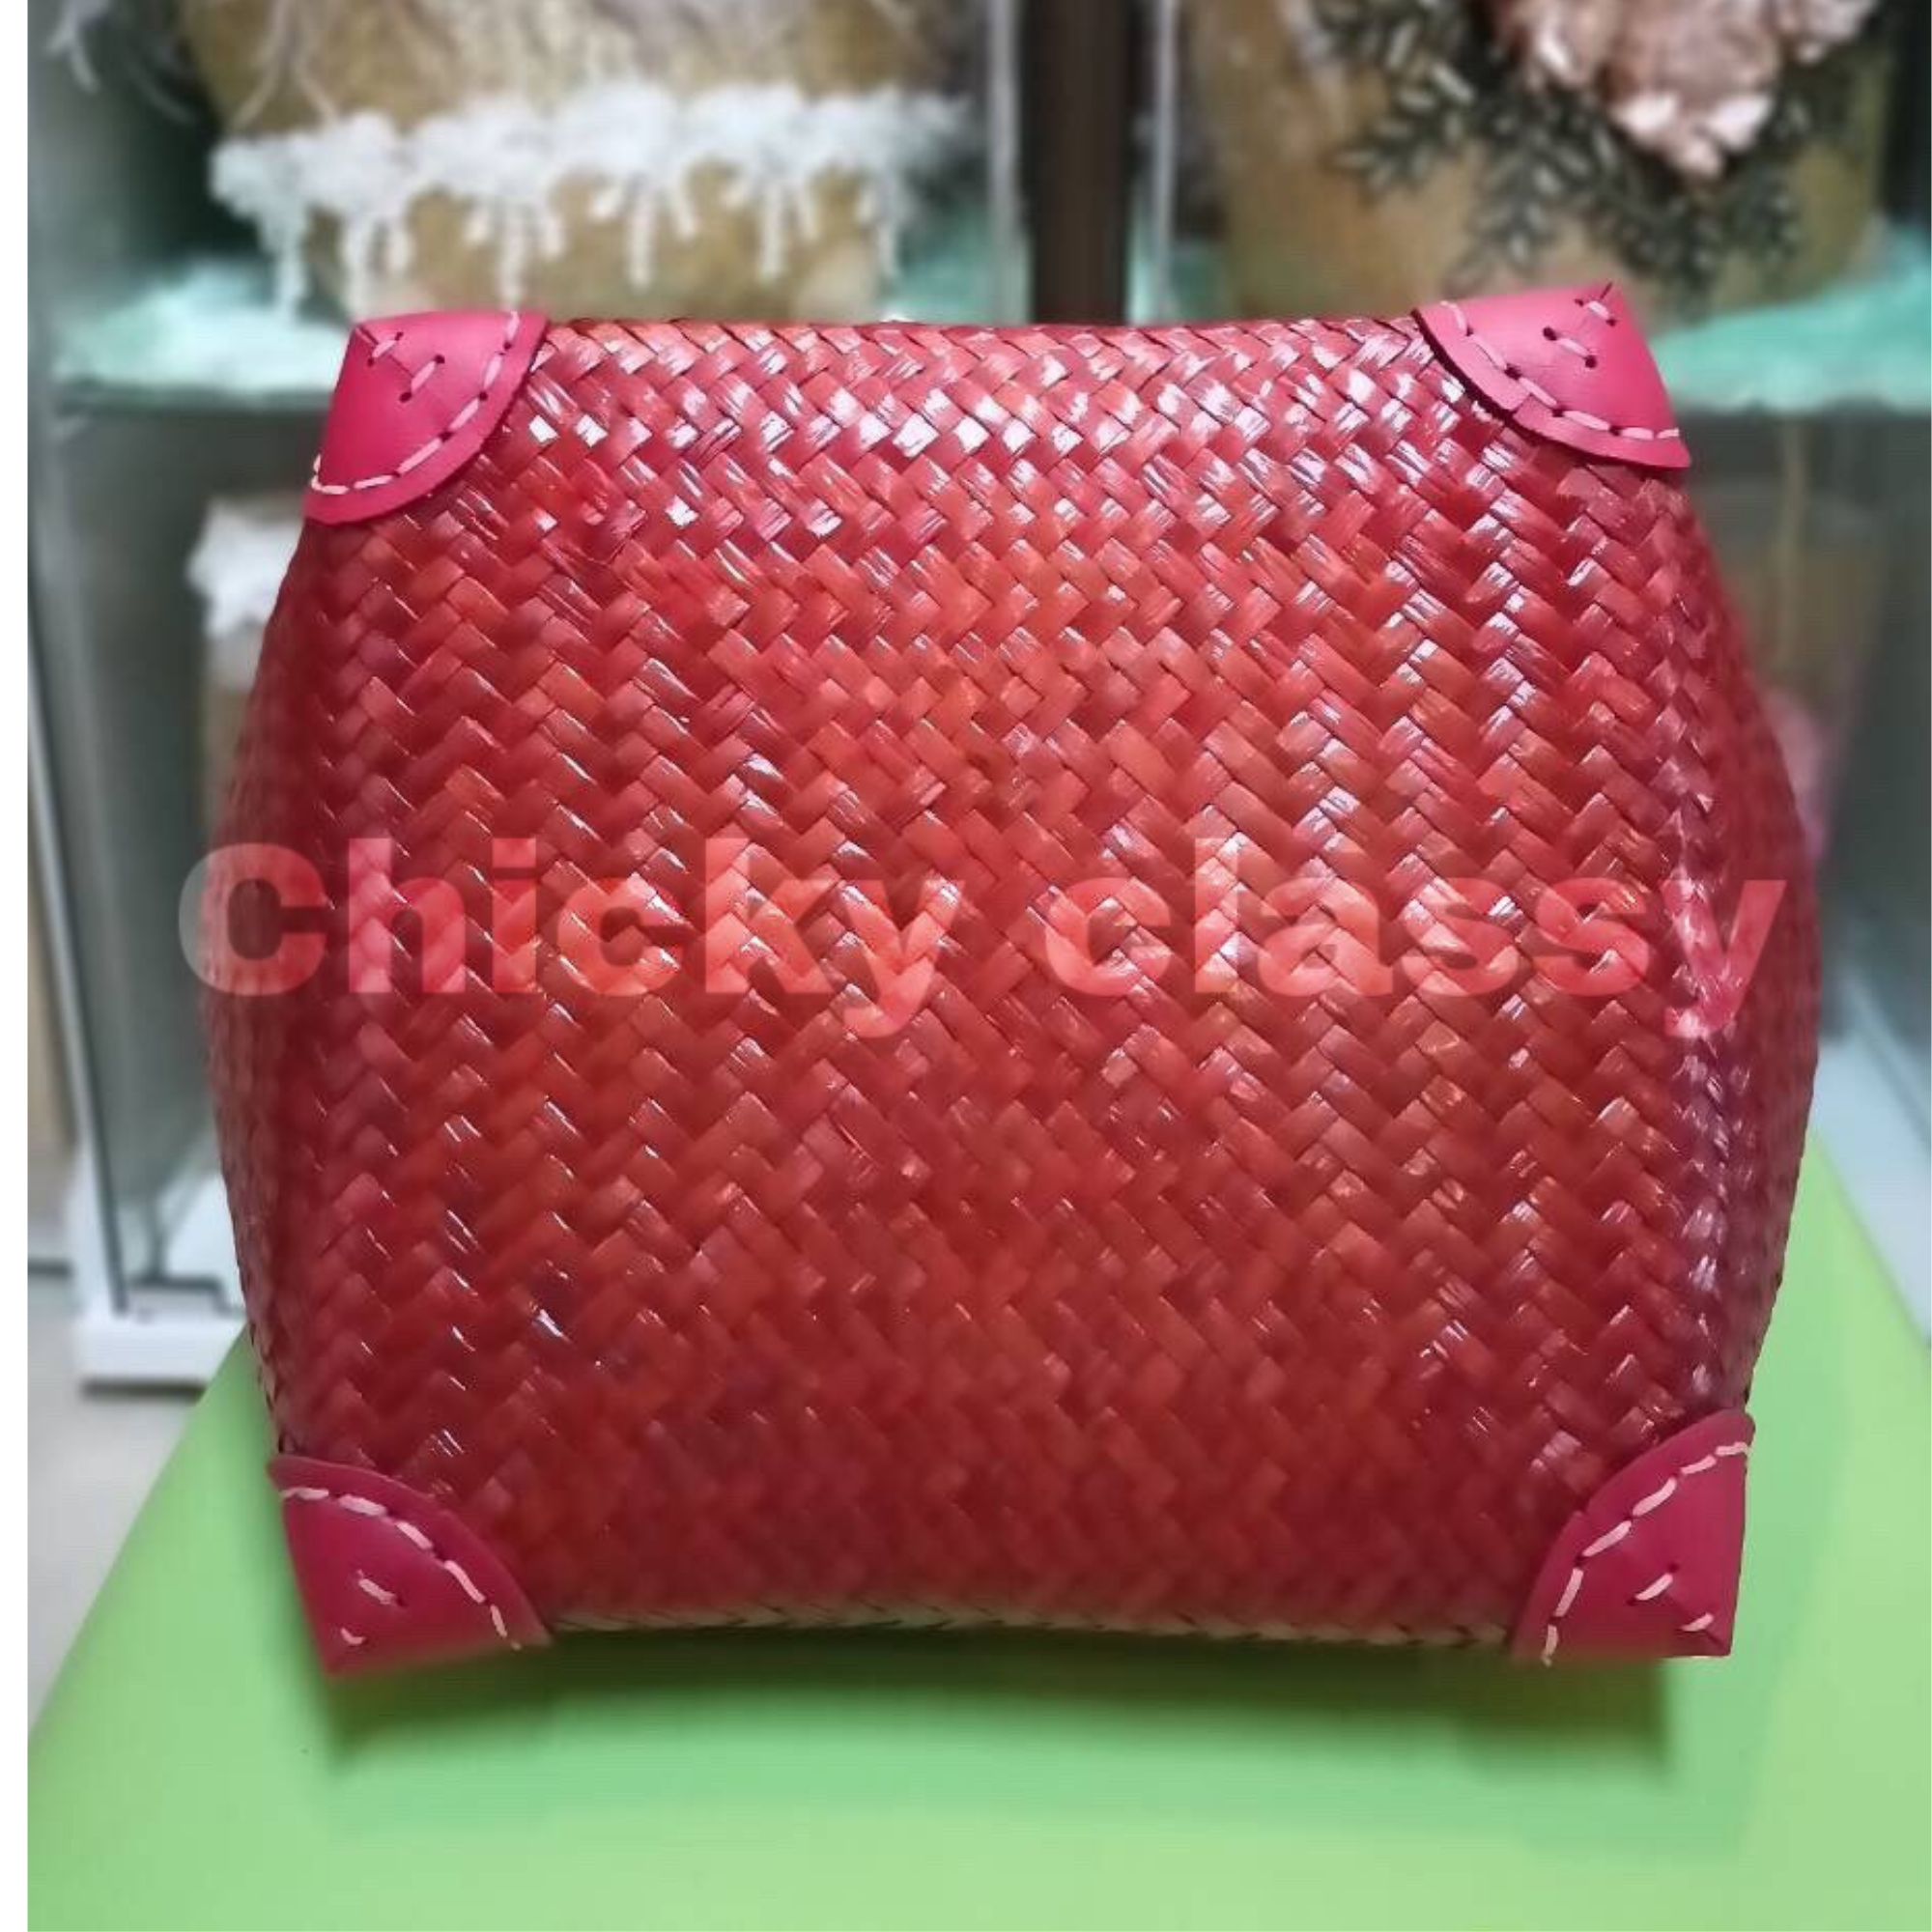 Chicky Classy Red Sweet bag